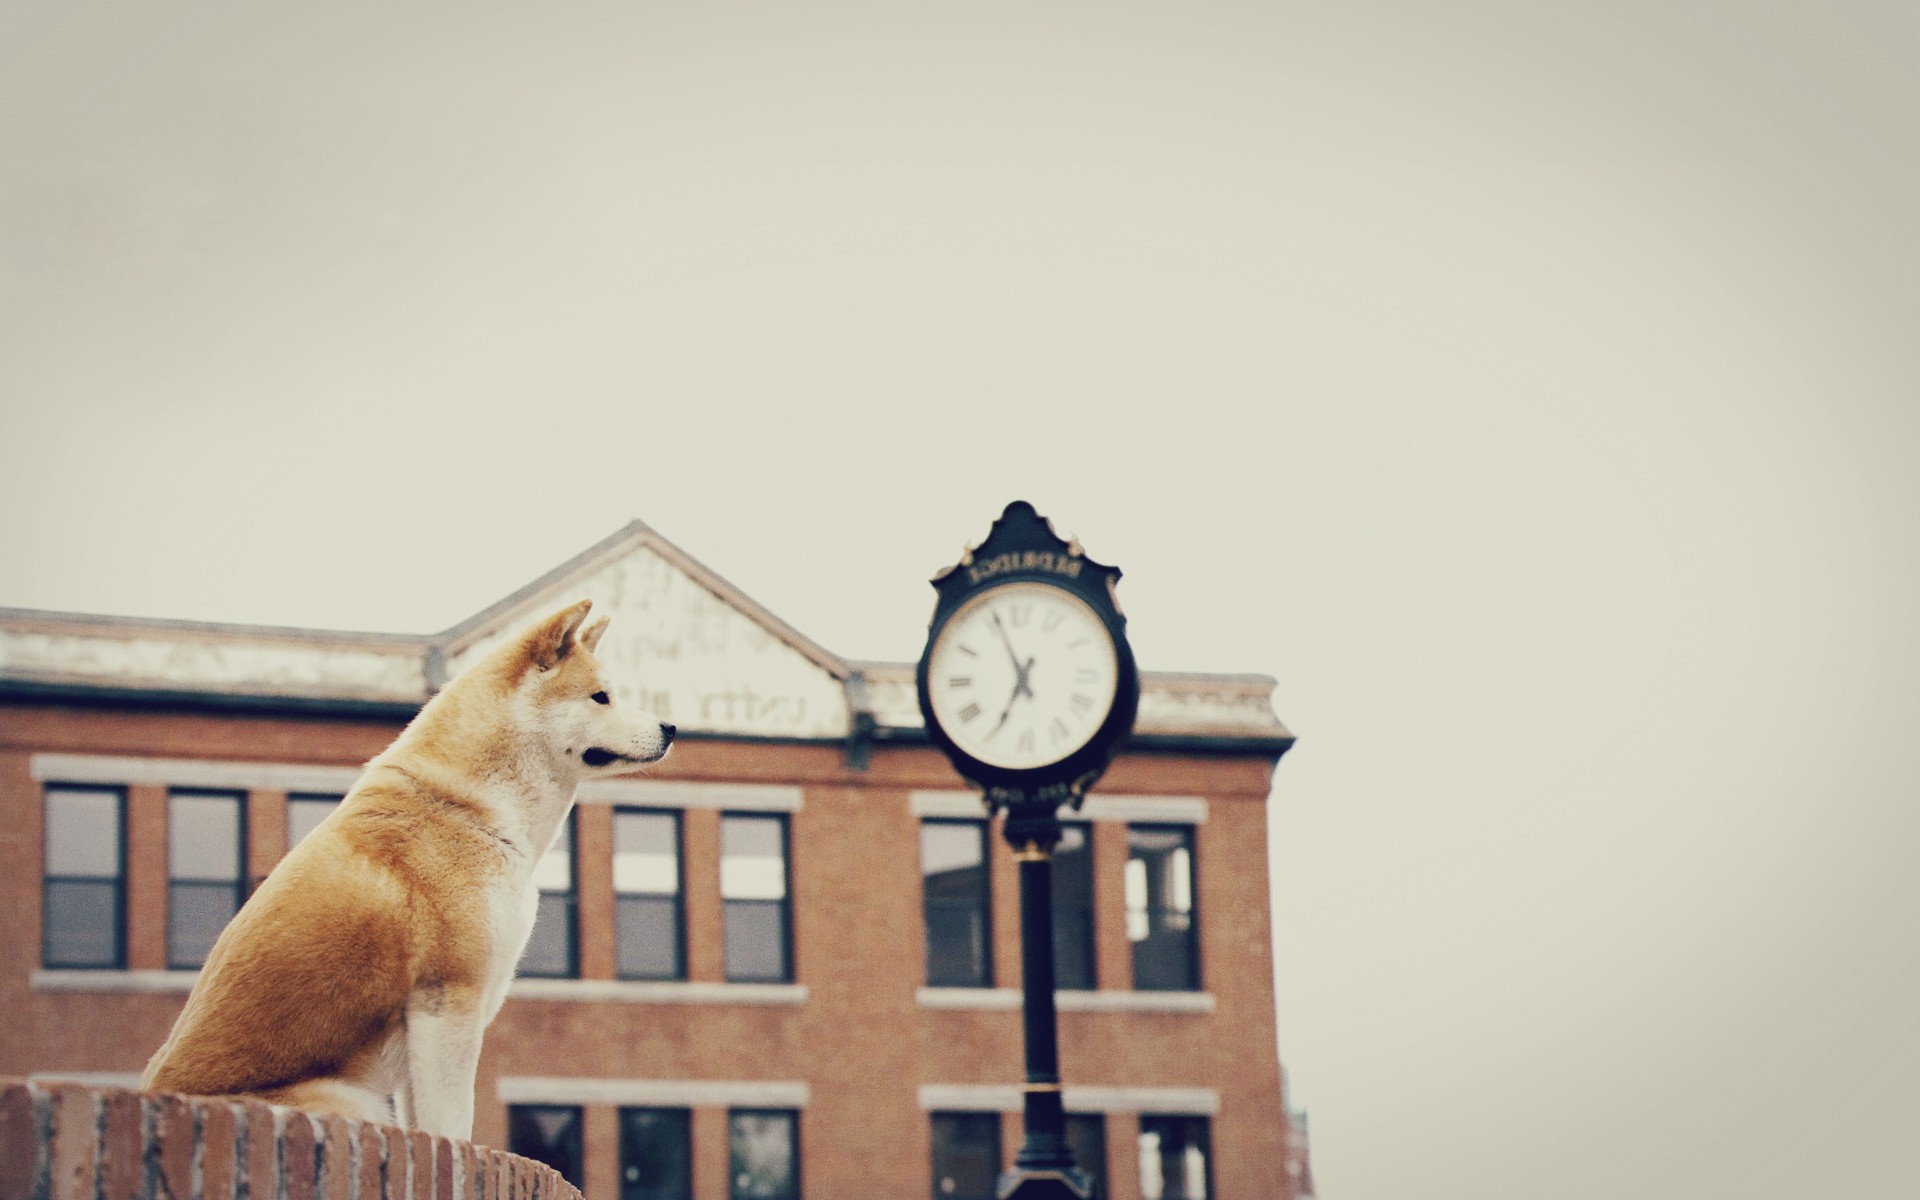 hachi a dogs tale dog Wallpaper